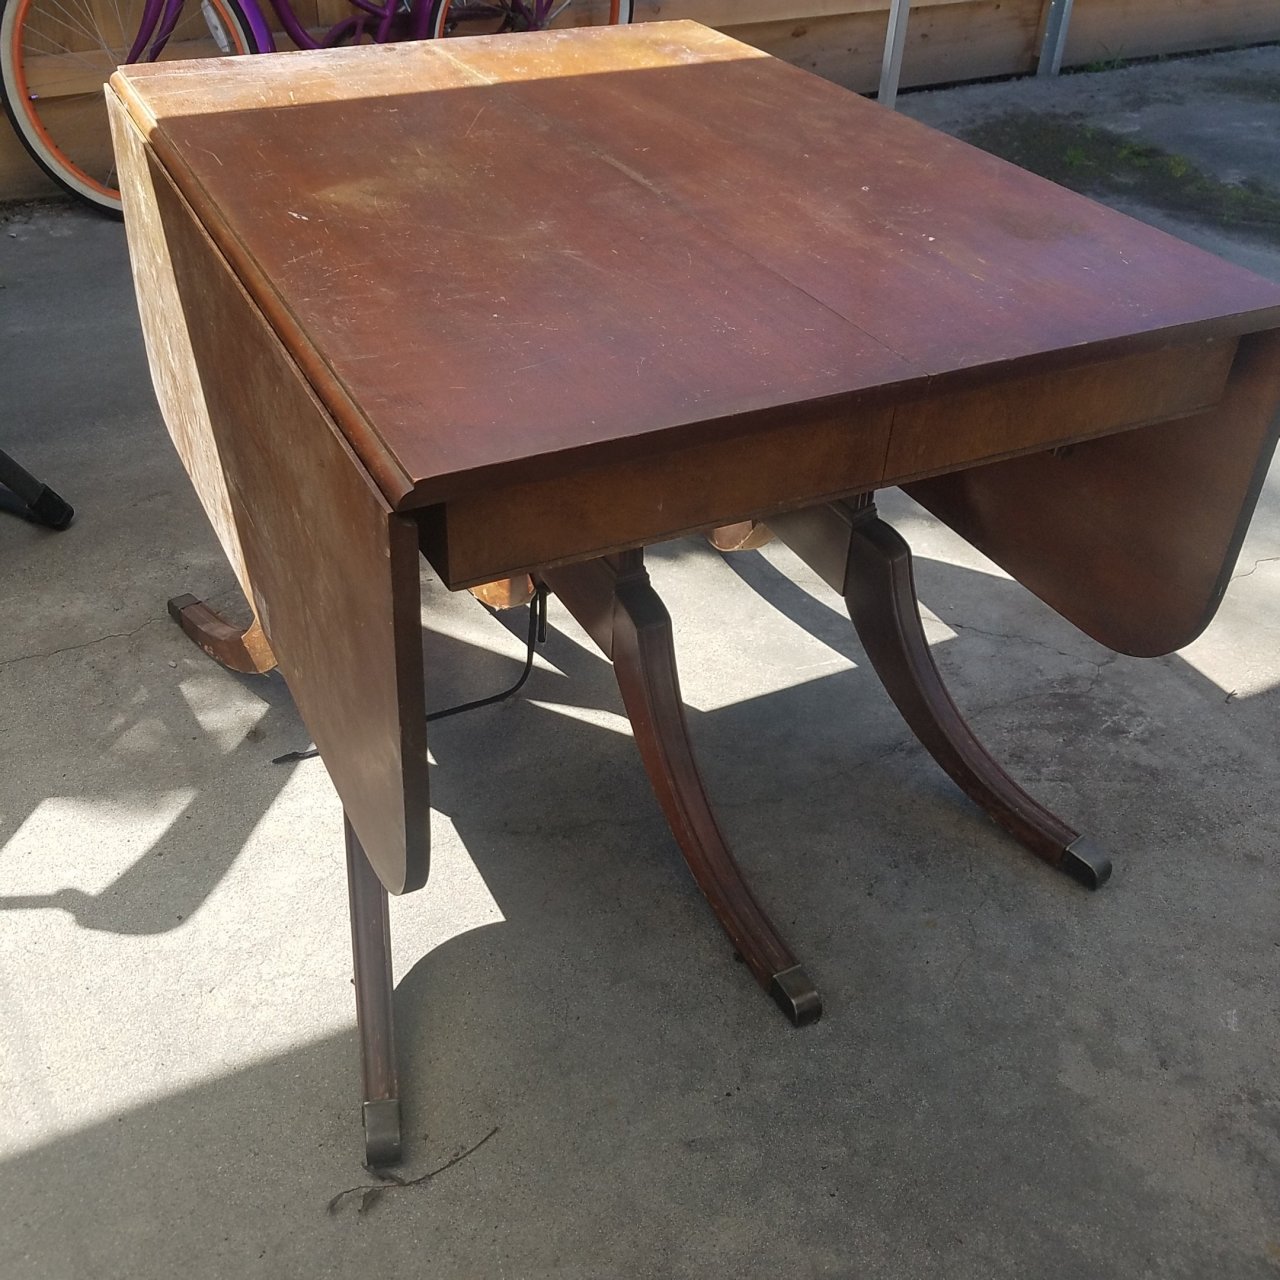 Double Drop Leaf Drexel Table | My Antique Furniture Collection